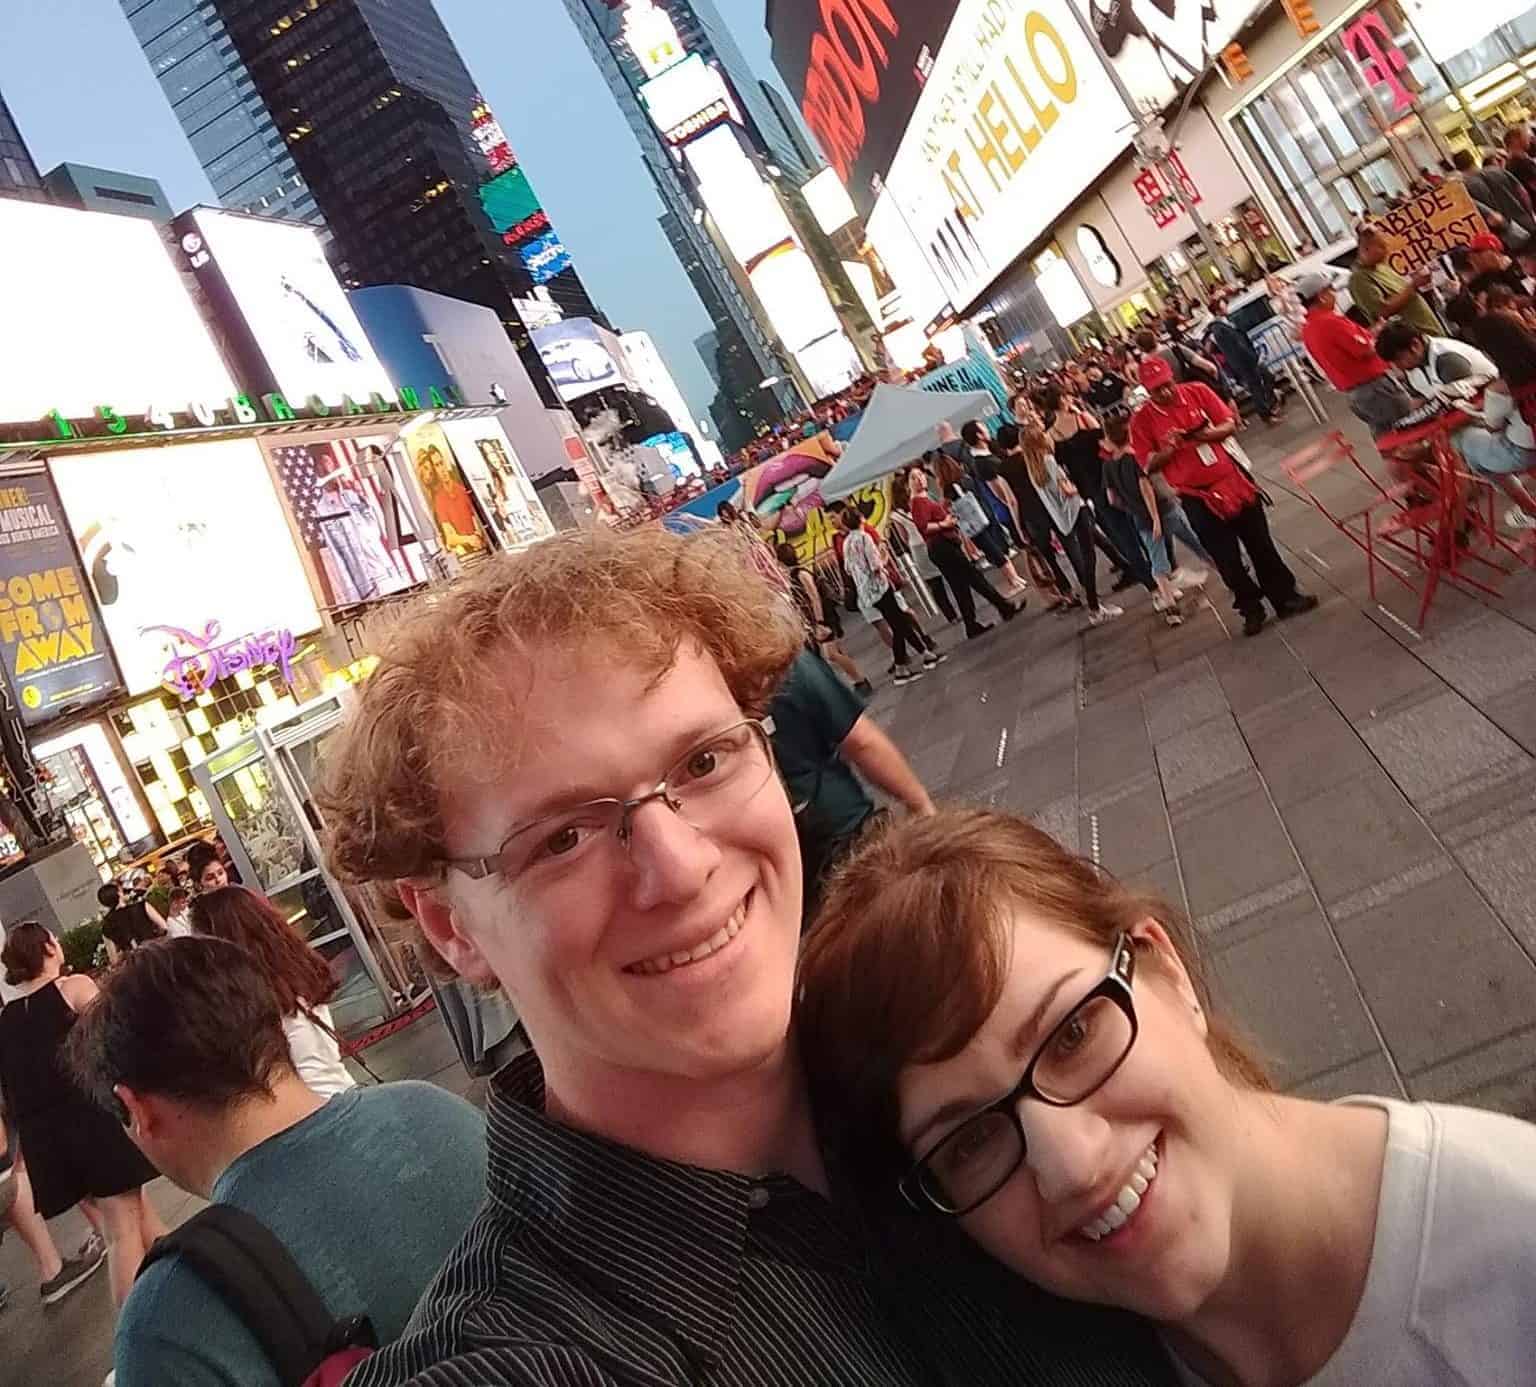 Derek and Kacie at Time's Square, New York City